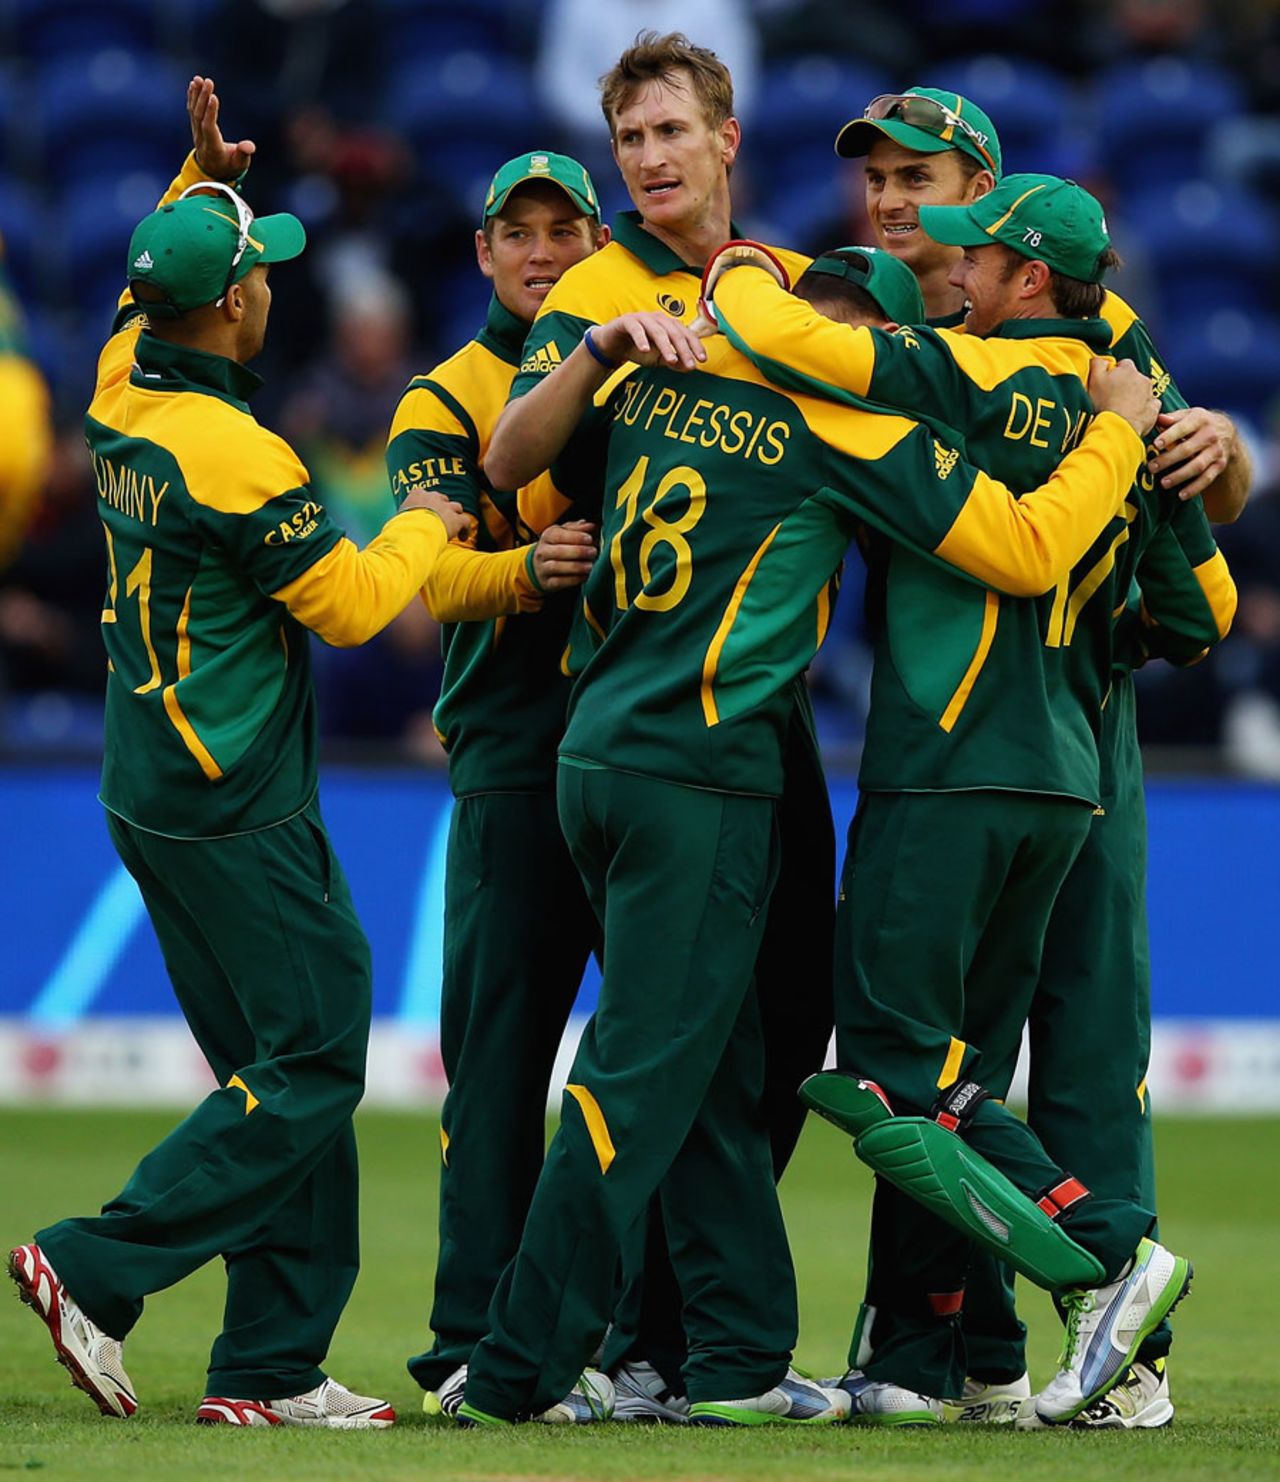 Chris Morris is smothered by team-mates after picking up a wicket, South Africa v West Indies, Champions Trophy, Group B, Cardiff, June 14, 2013